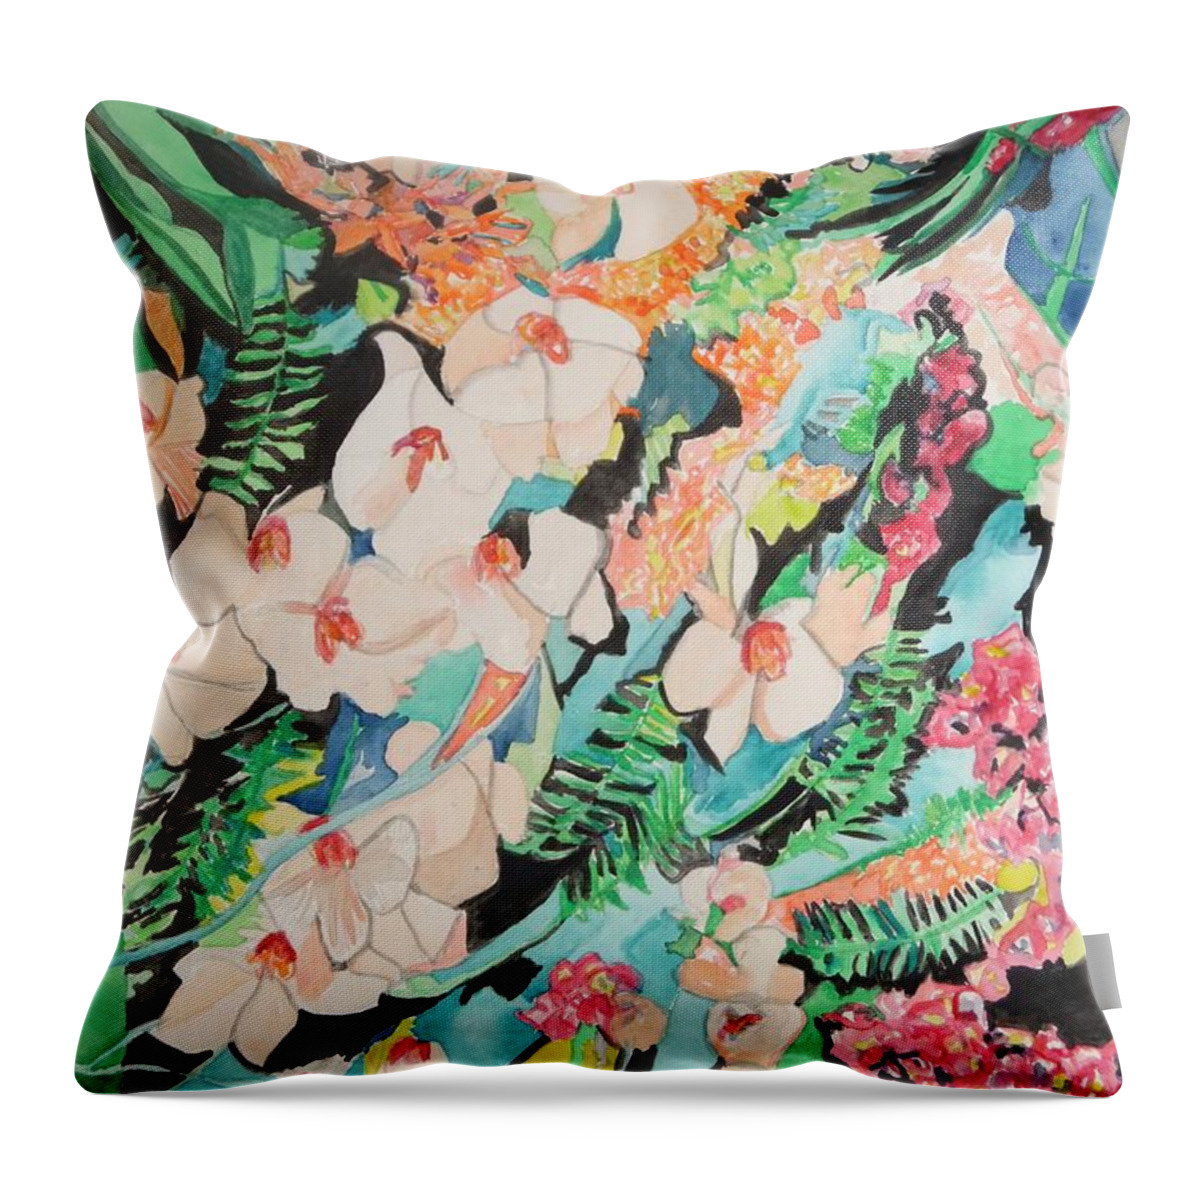 The Gallery Of Orchids 2 Throw Pillow featuring the painting The Gallery of Orchids 2 by Esther Newman-Cohen